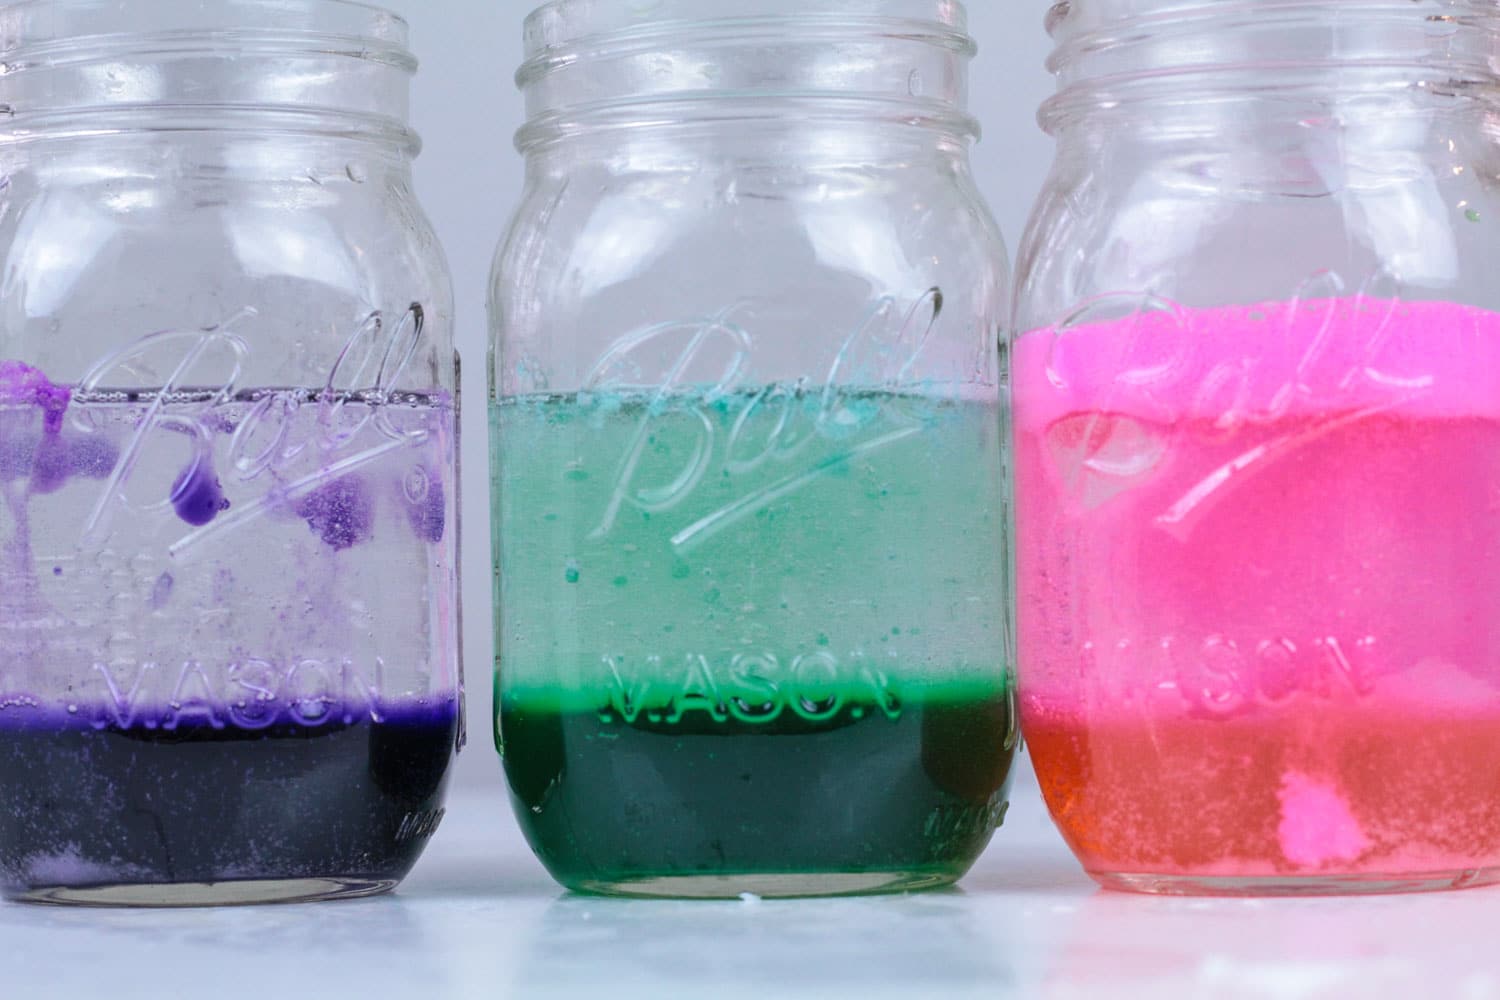 Love Easter? Love science? You won't want to miss this fun Easter lava lamp science experiment for kids! Kids will love the bright spring colors and it's a fun way to explore chemical reaction science with young kids using lava lamp technology!